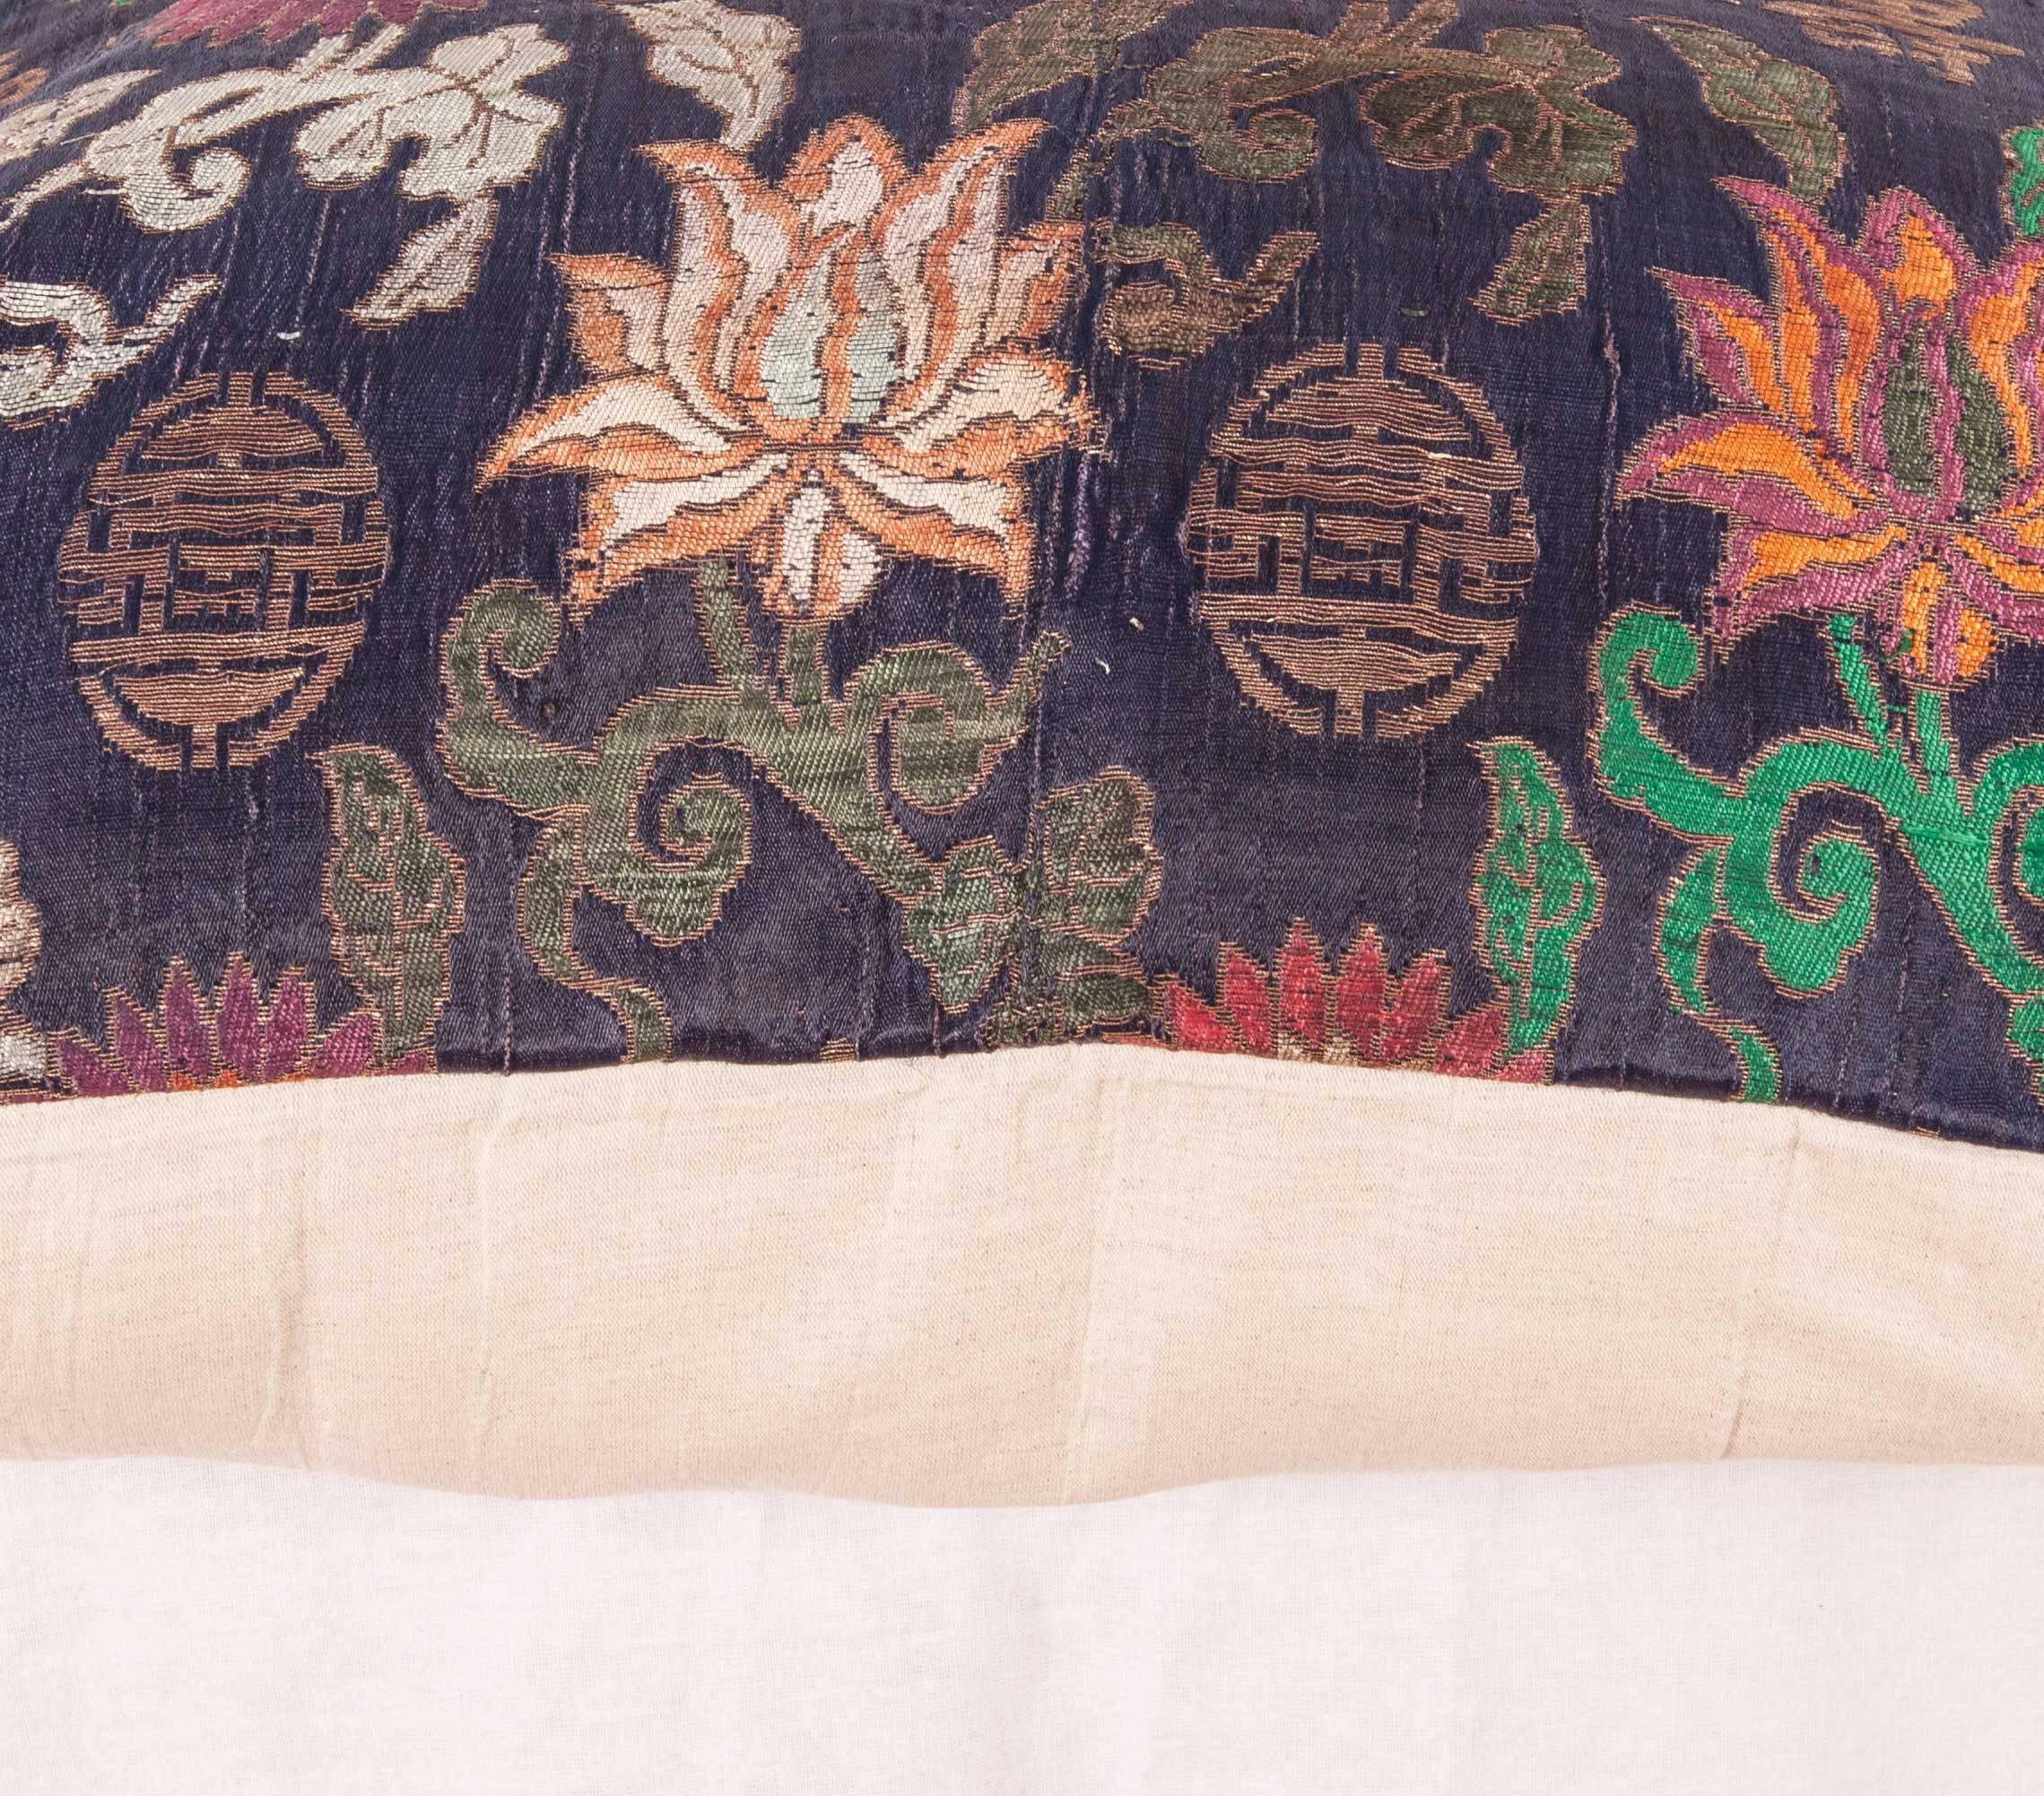 Hand-Woven Pillow Case Made from an Early 20th Century Chinese Brocaded Textile